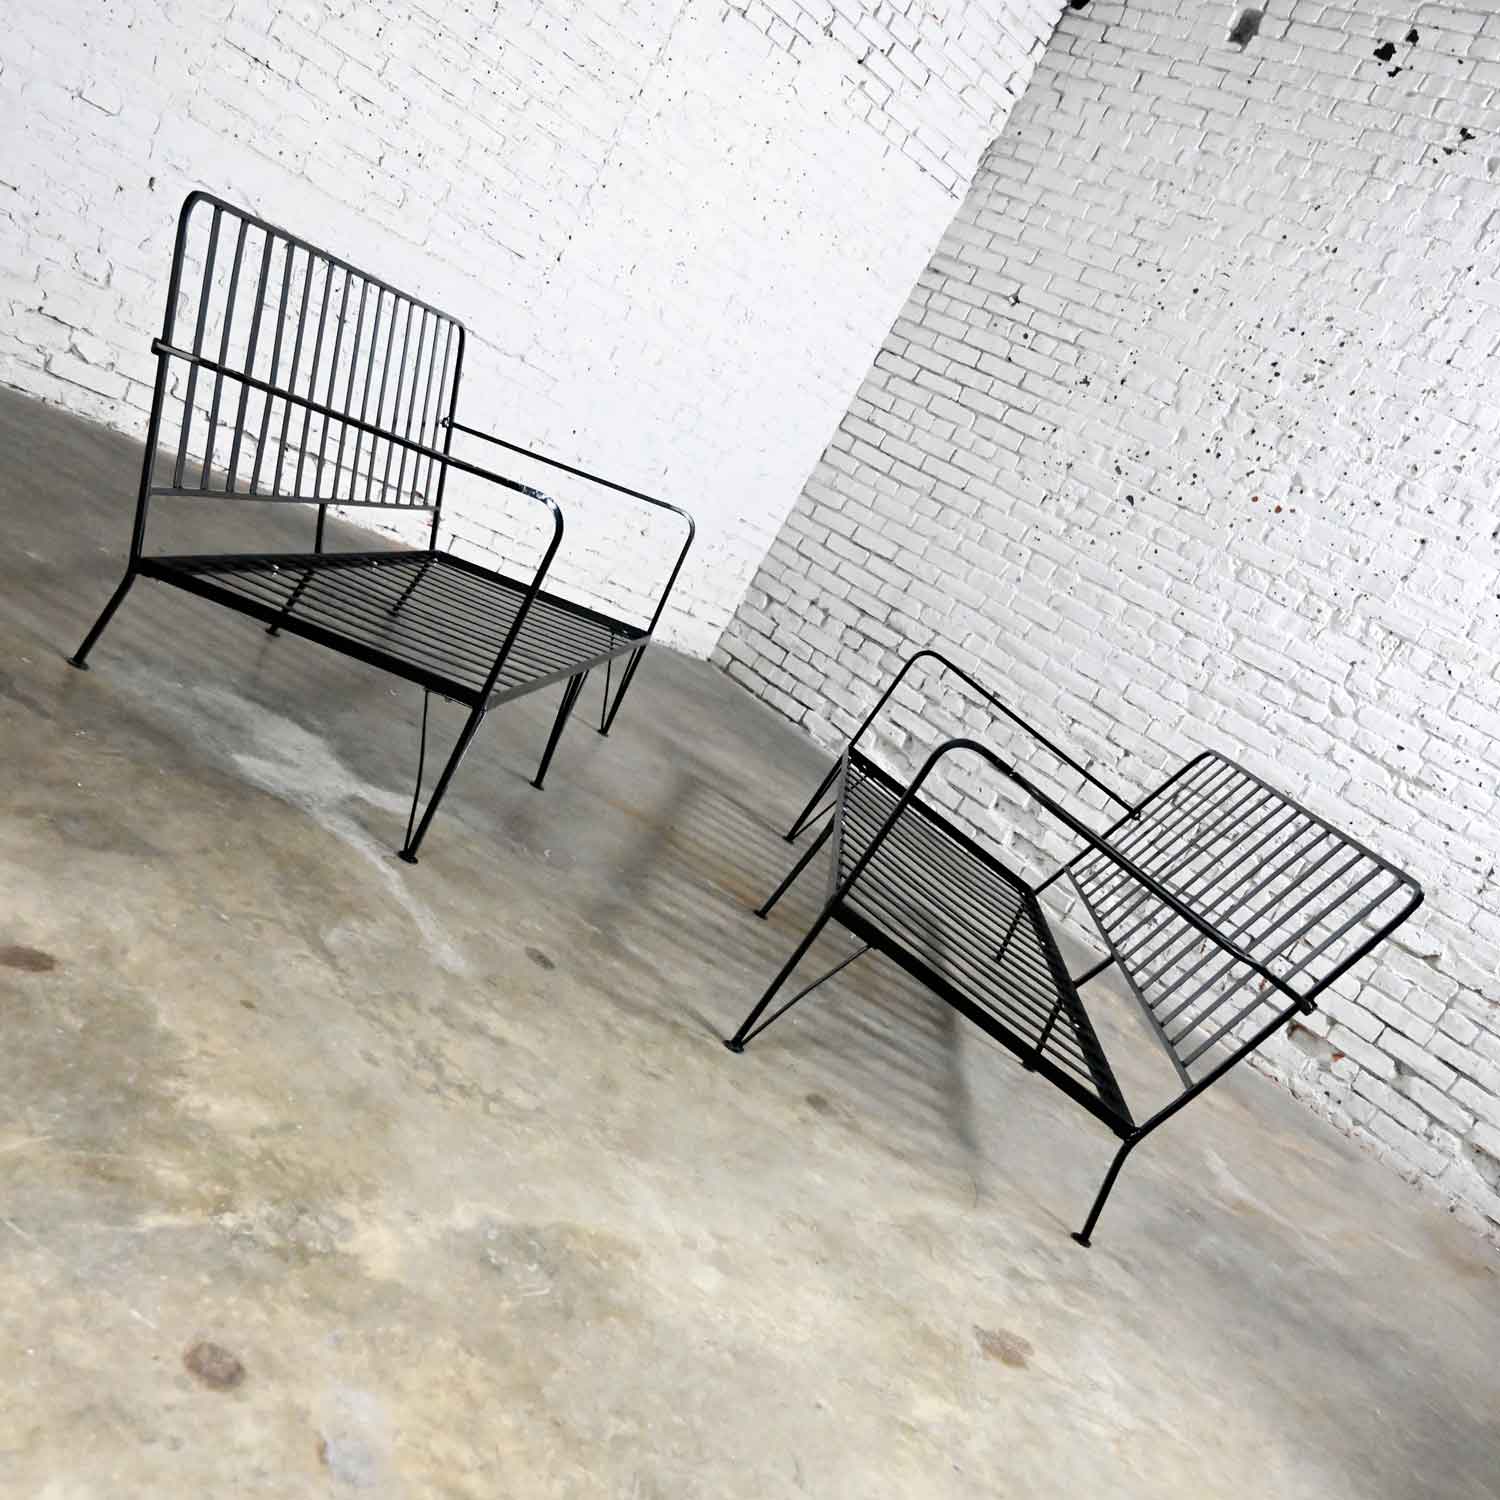 Vintage Mid-Century Modern Pair Painted Black Wrought Iron Outdoor Settees Frames Only